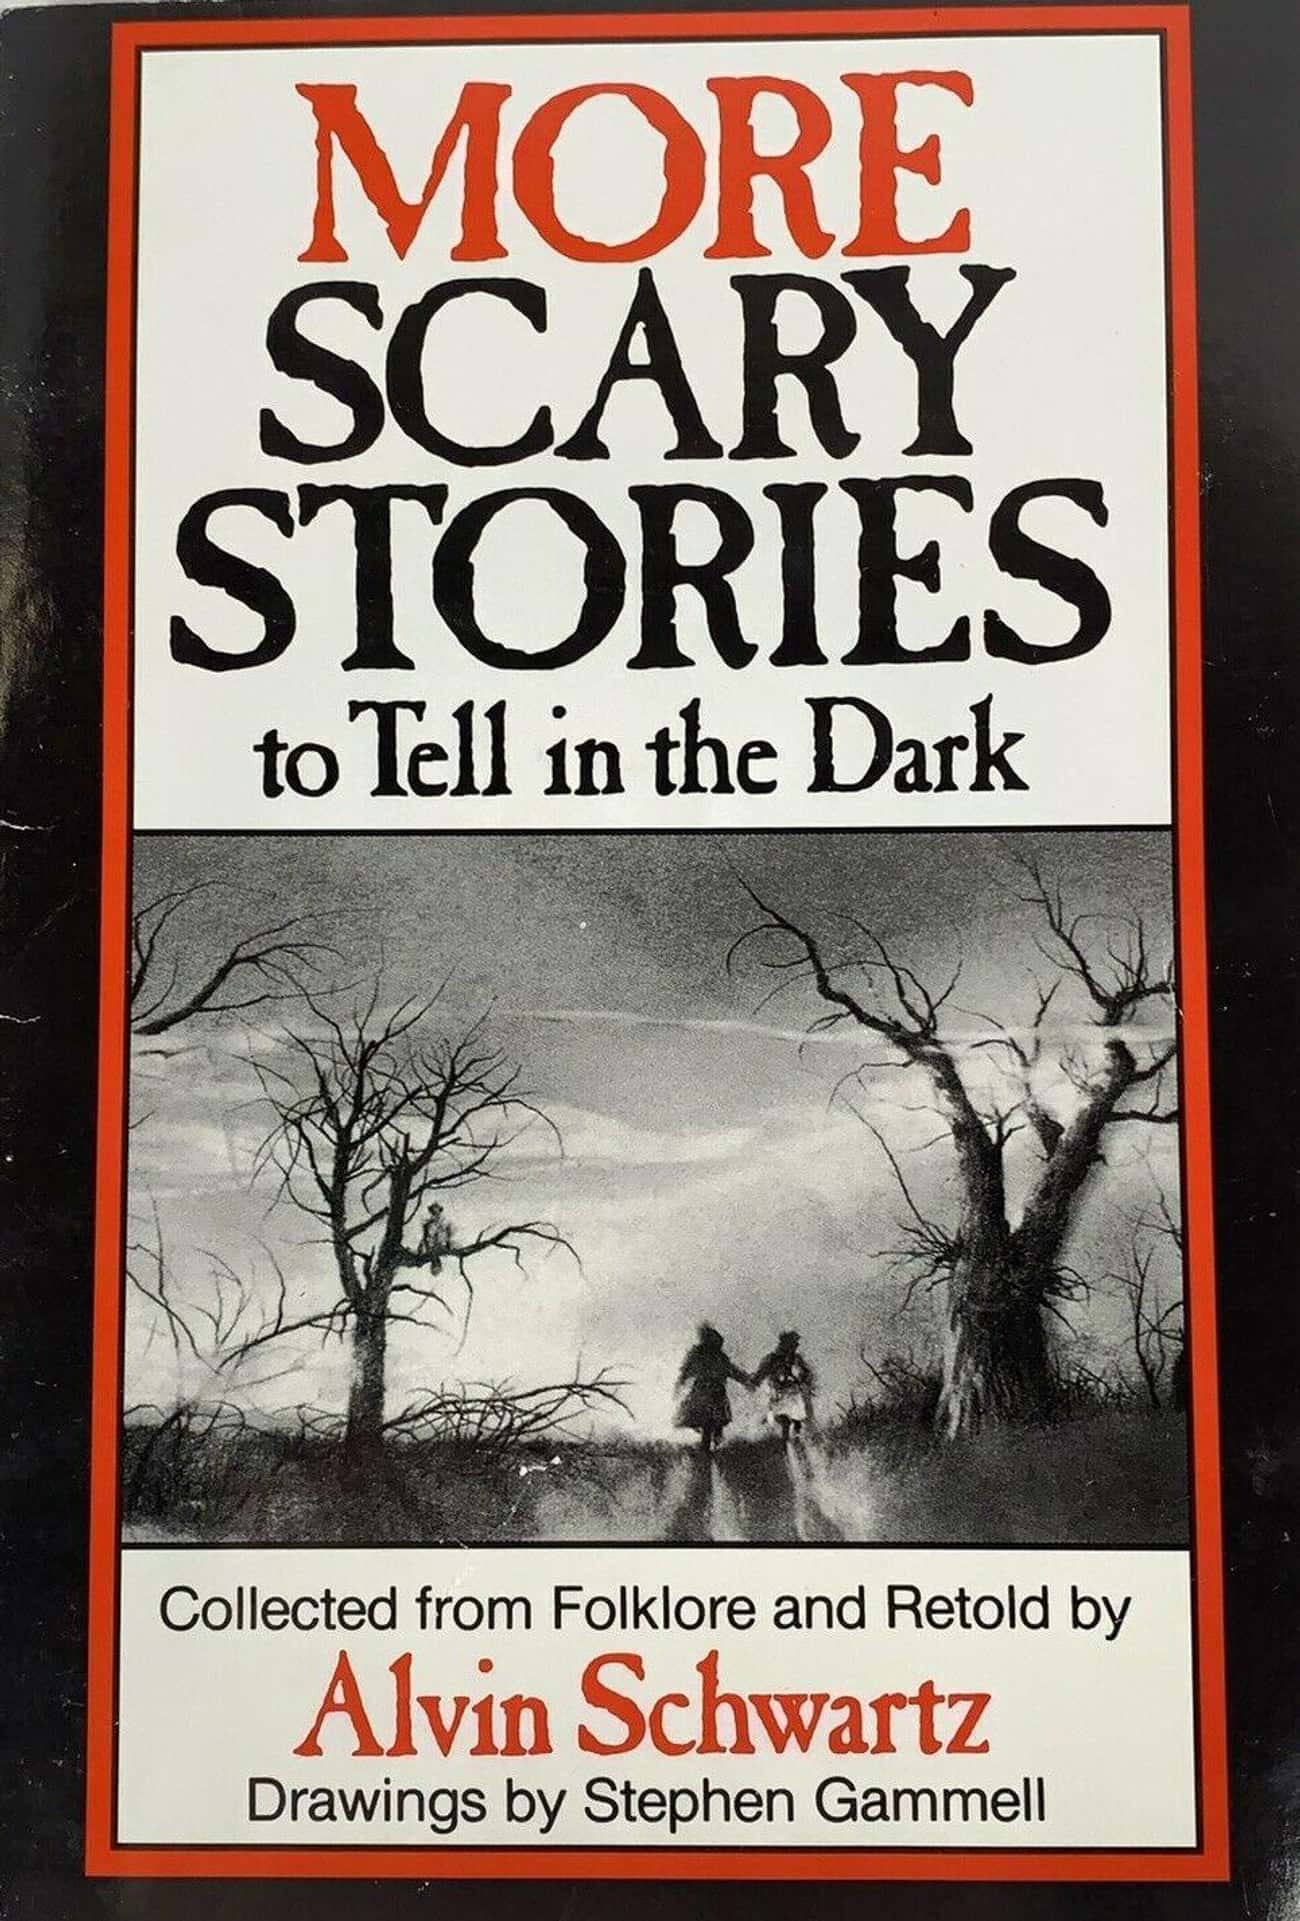 Scary stories in the dark. Scary stories to tell in the Dark Red Room.